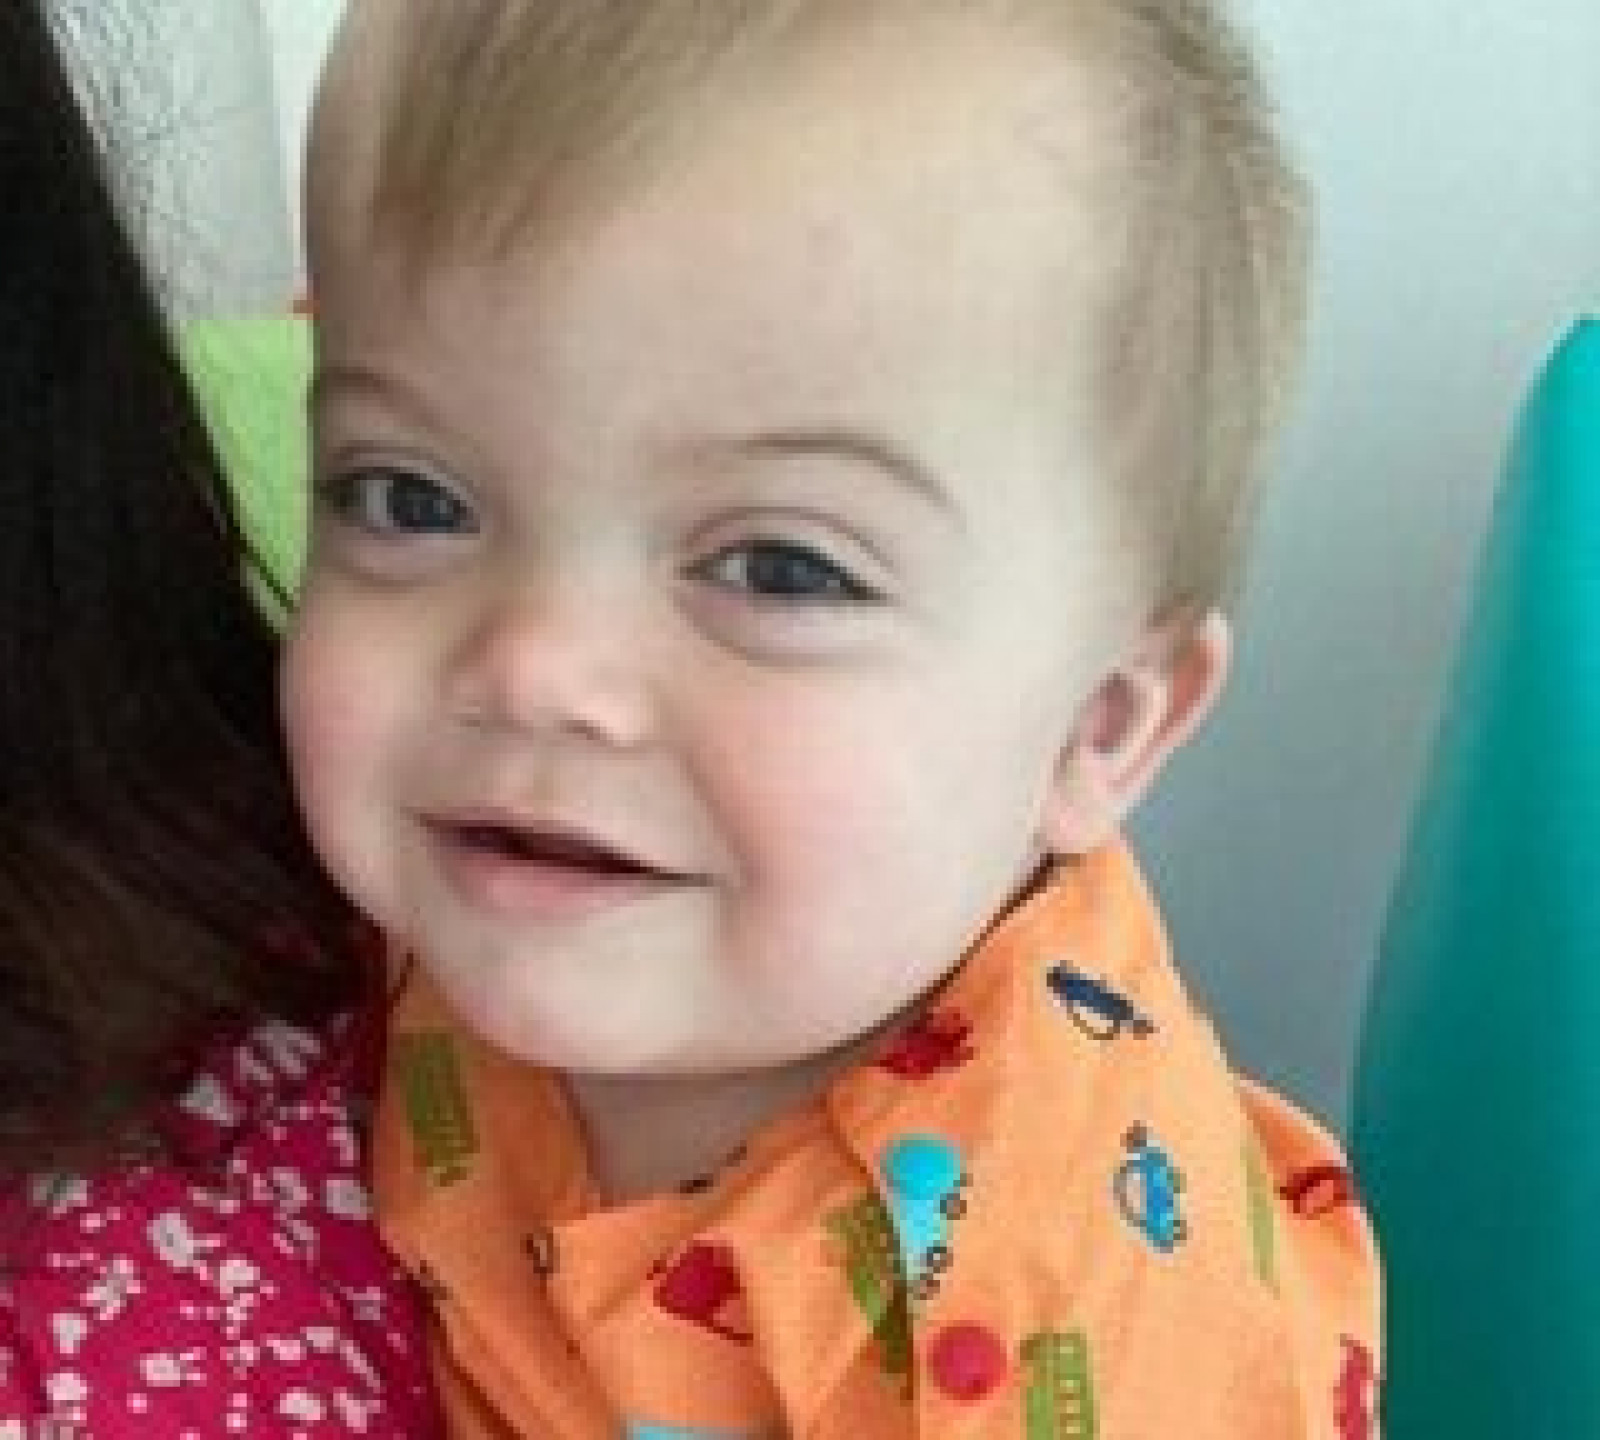 Please Help Save 18 Month Old Gunner's Life